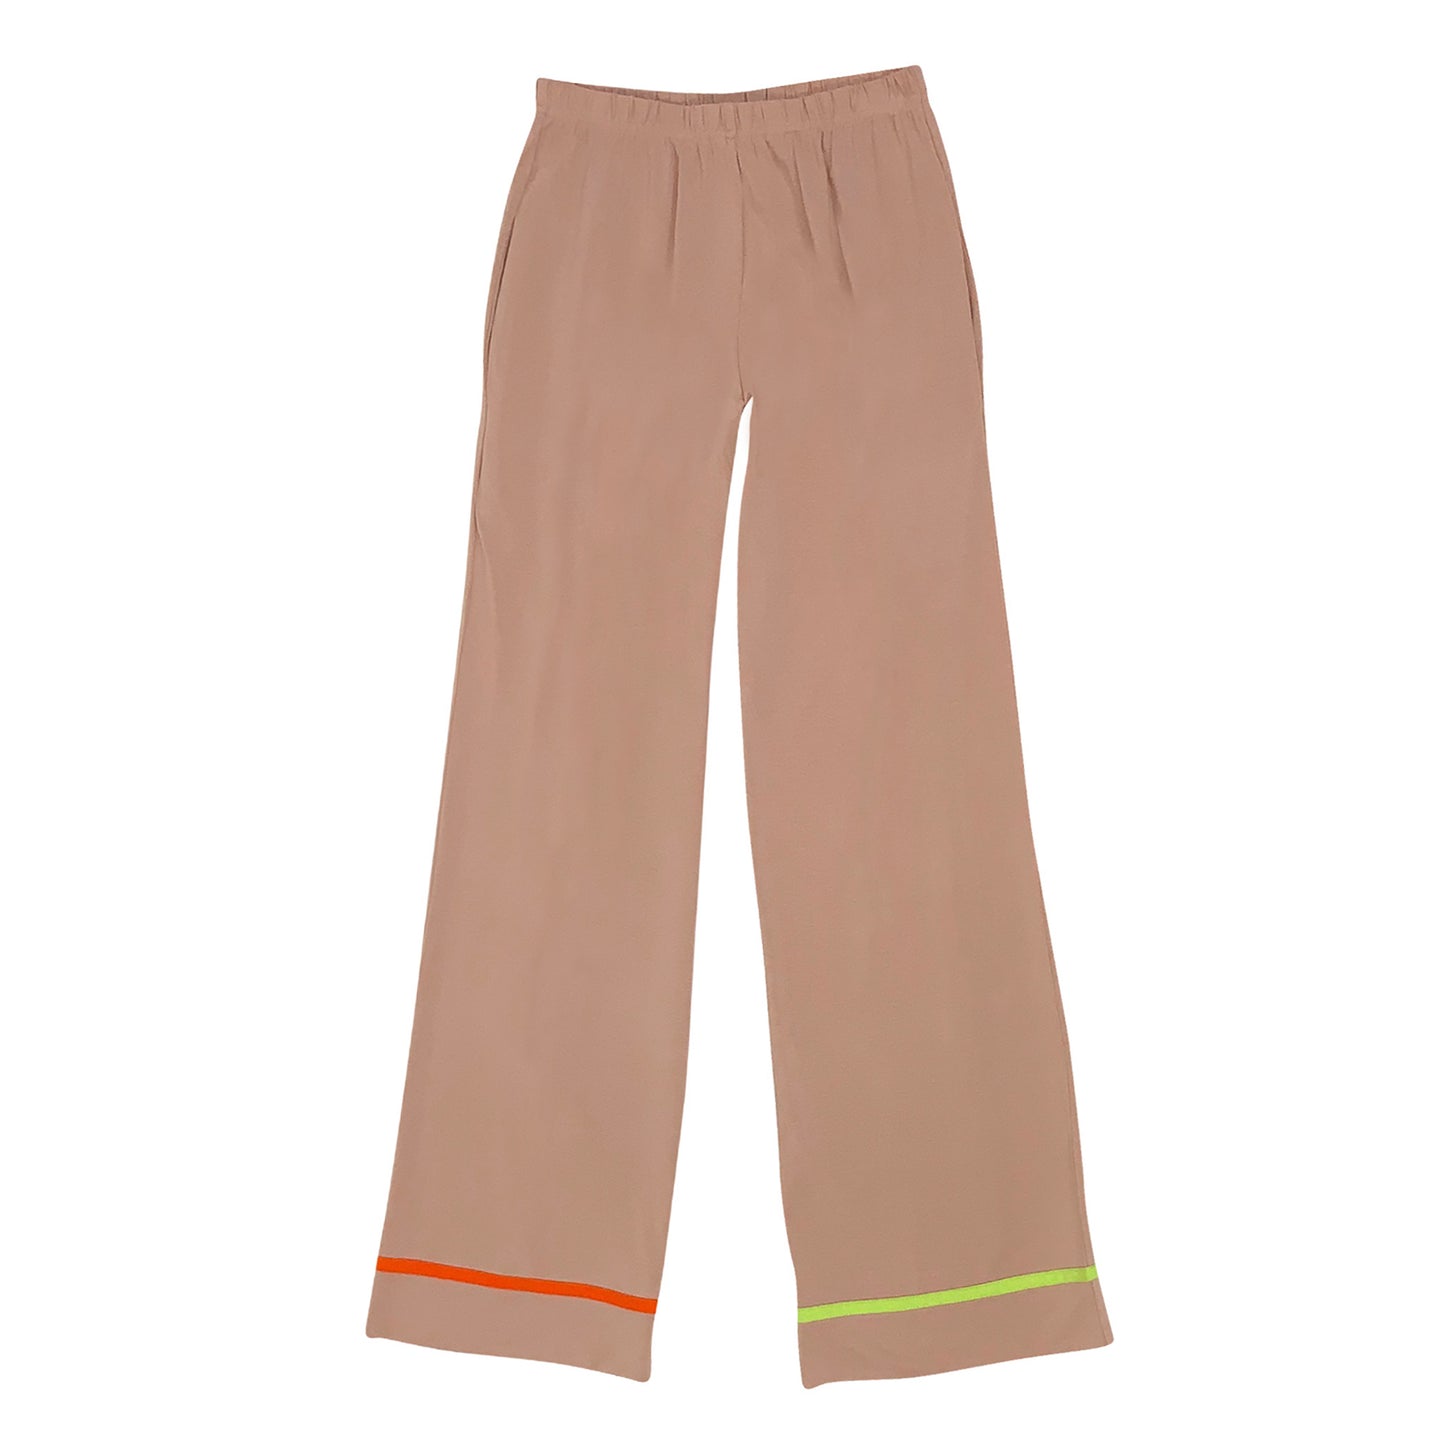 Pants Lovely Break, nude with bright accent stripe.